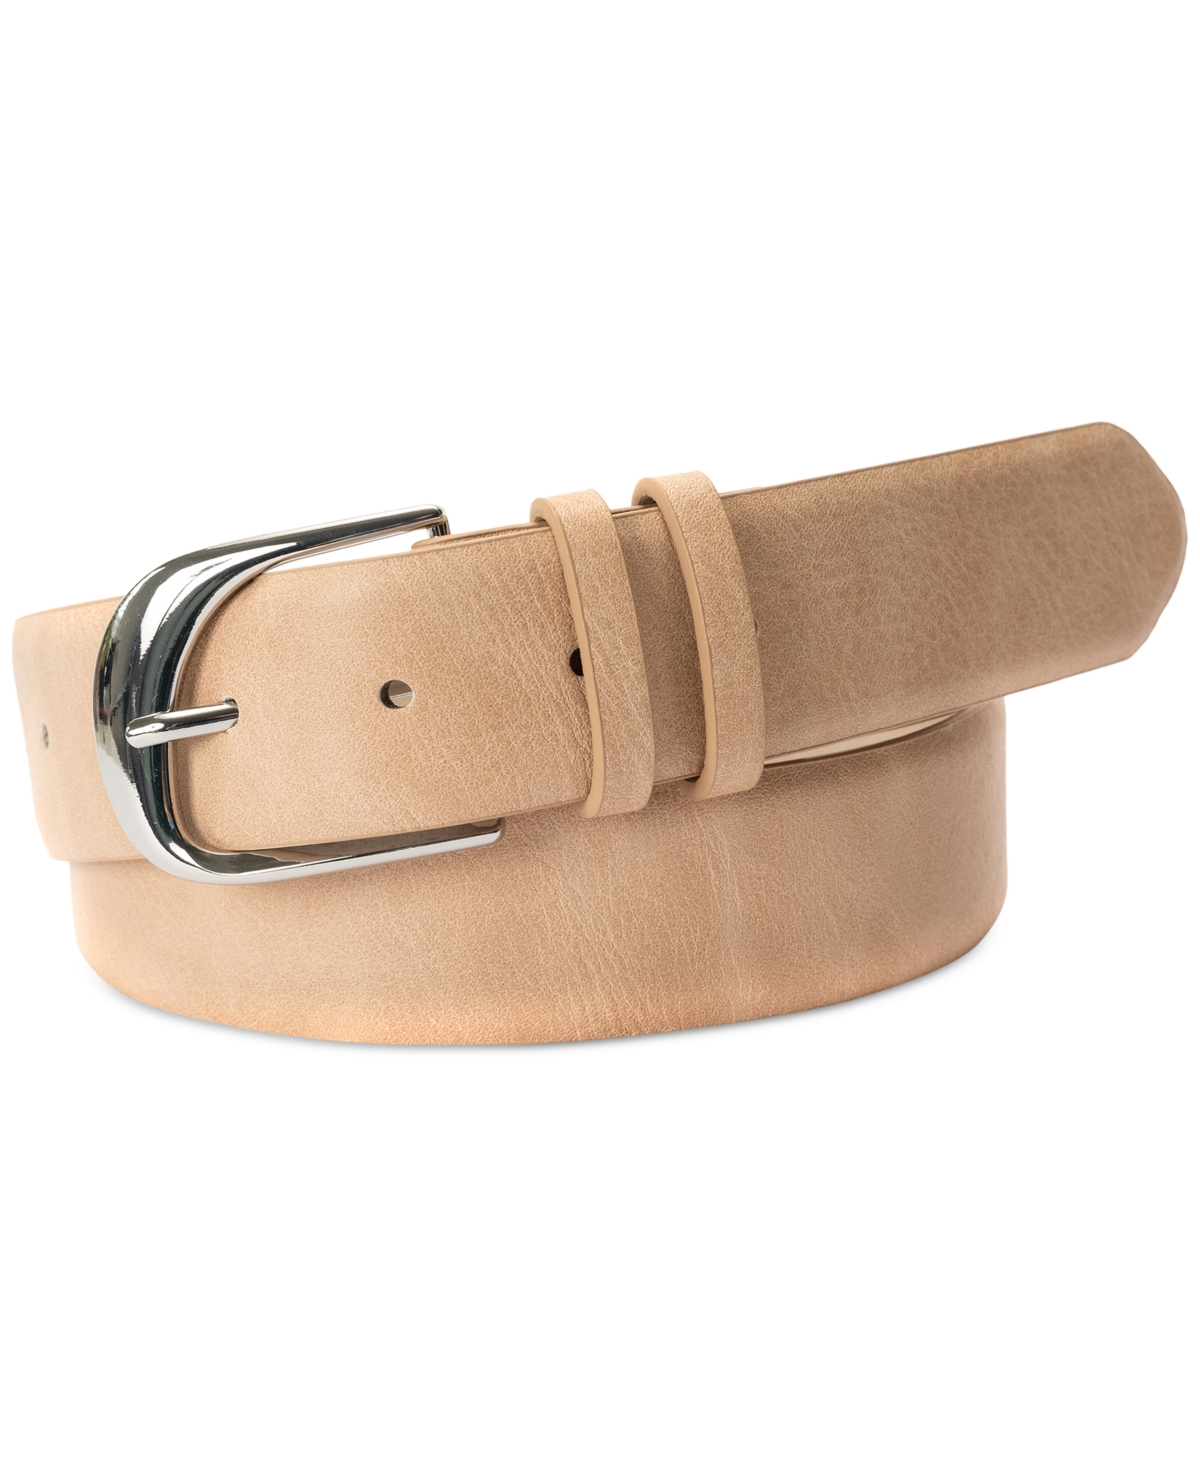 Sculpted Buckle Panel Belt, Created for Macy's - Natural